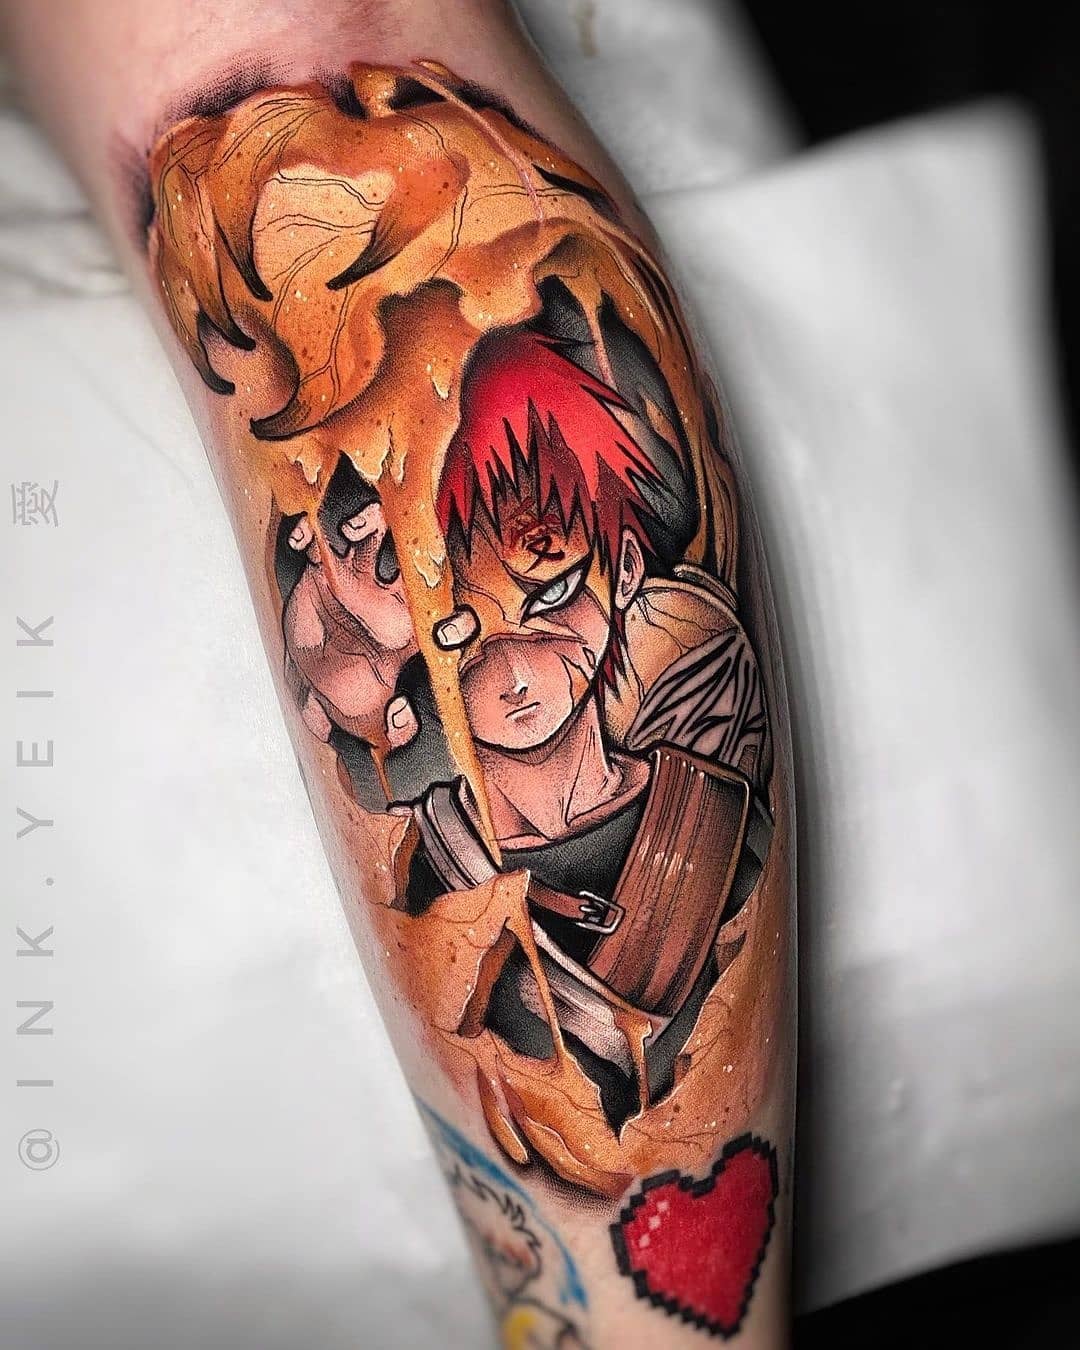 Gaara Tattoo — What Hides Behind the Love Letter?